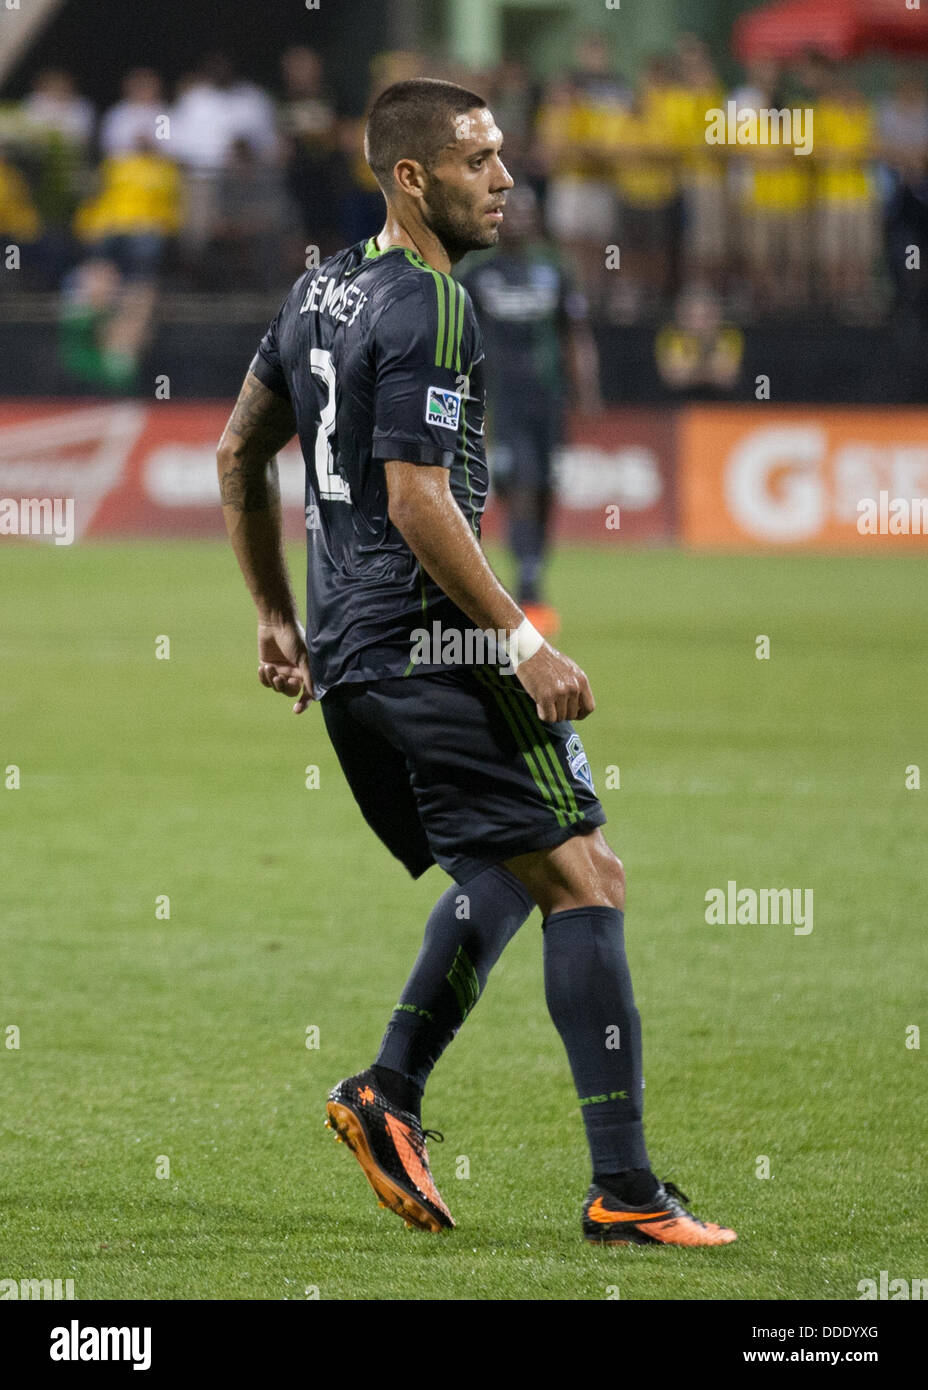 Aug. 31, 2013 - Columbus, Ohio, United States of America - August 31, 2013: Seattle Sounders FC forward Clint Dempsey (2) during the Major League Soccer match between the Seattle Sounders FC and the Columbus Crew at Columbus Crew Stadium in Columbus, OH. The Seattle Sounders FC defeated the Columbus Crew 1-0. Stock Photo